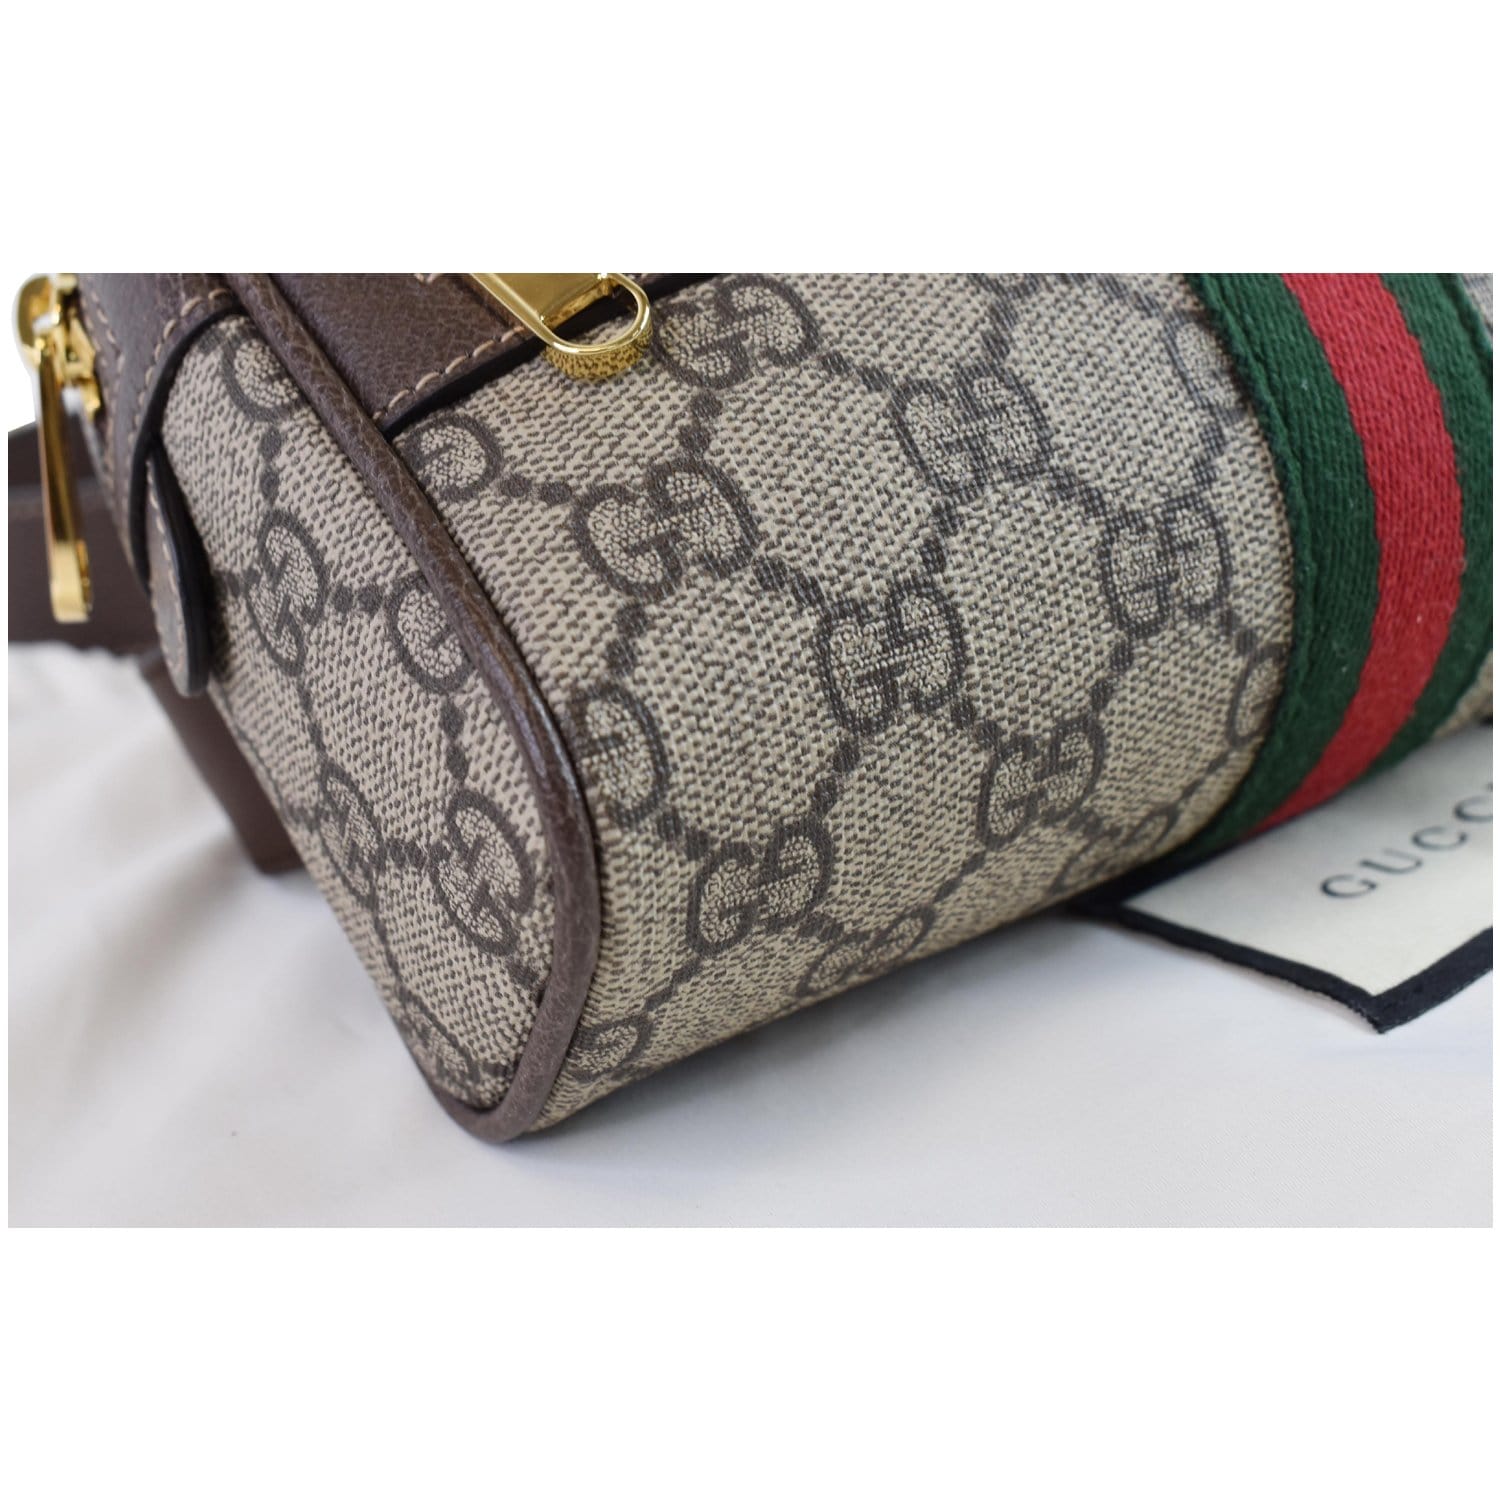 Gucci Ophidia Small GG Supreme Shoulder Bag in Brown